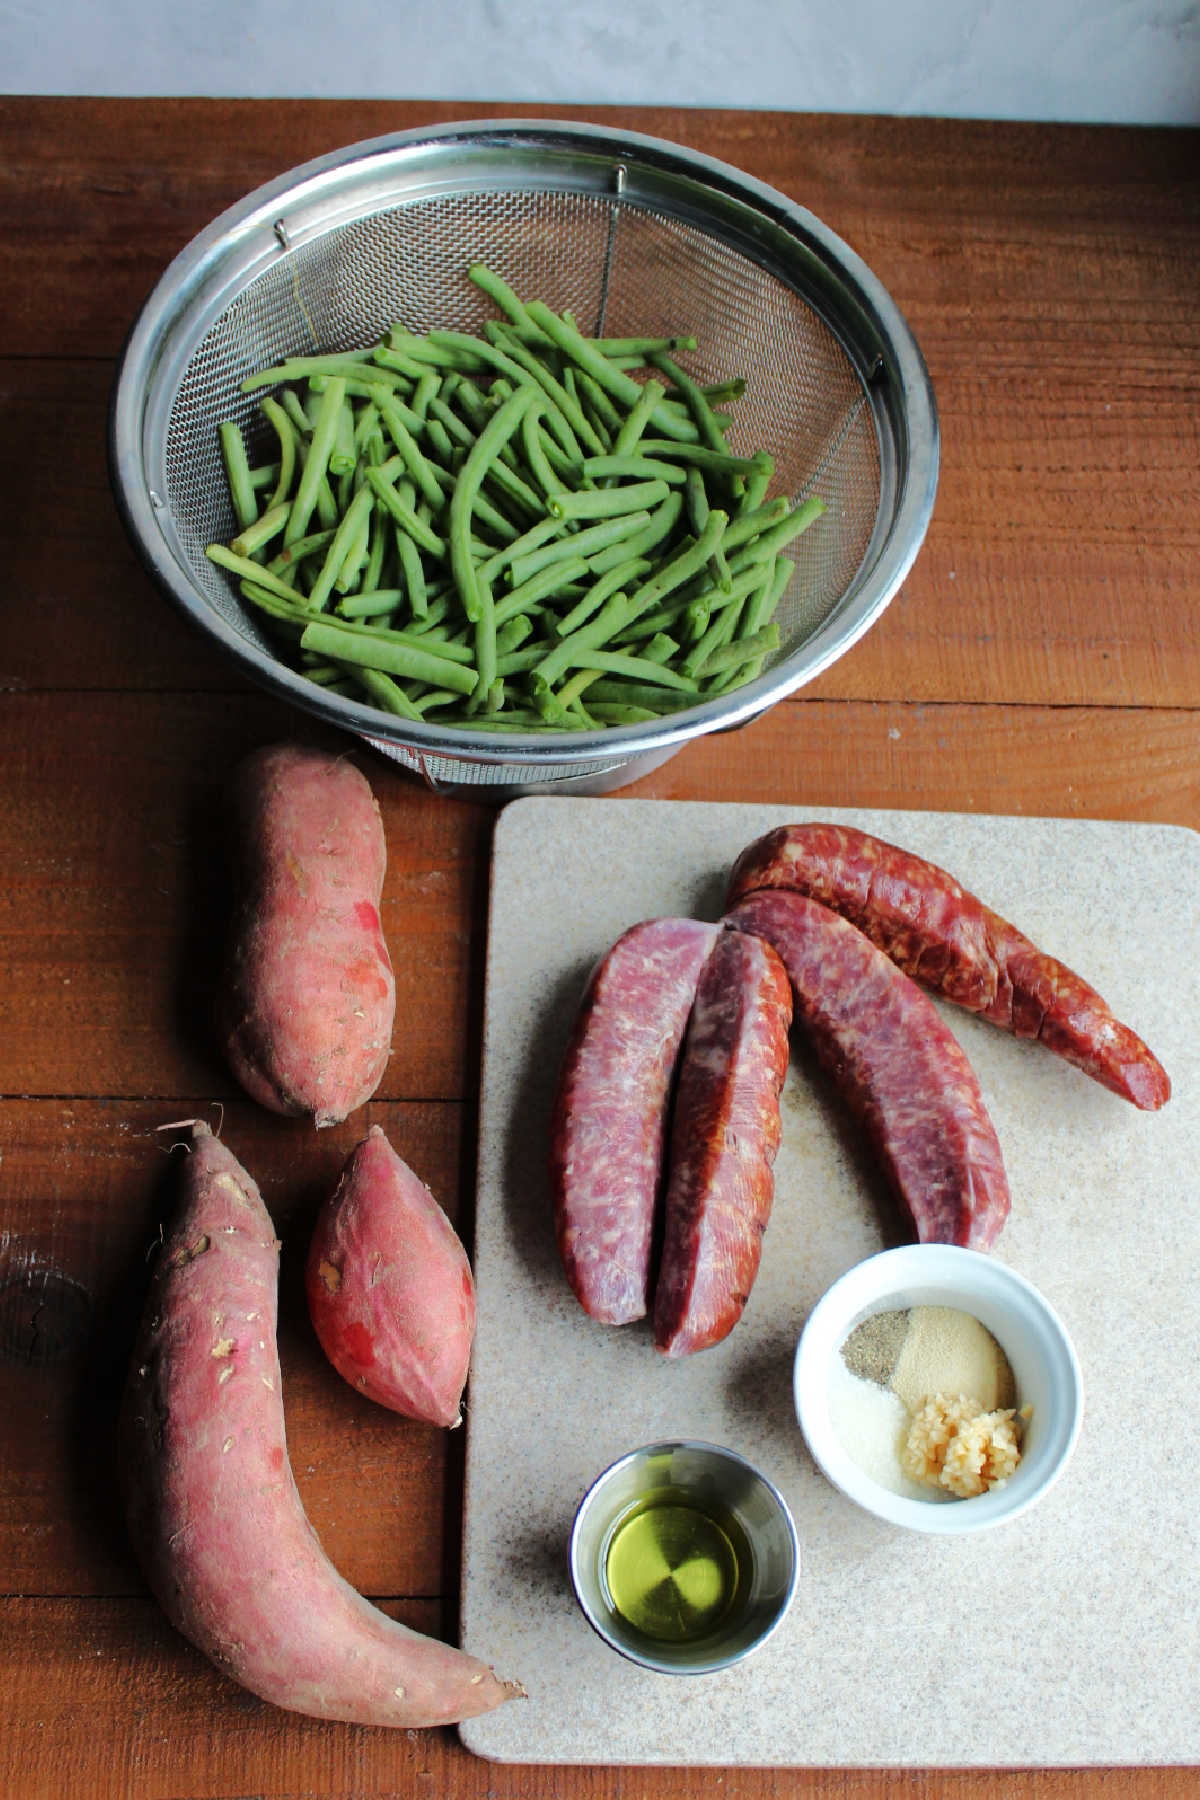 Ingredients including smoked sausage, fresh sweet potatoes and green beans, oil, garlic, salt, pepper, and onion powder ready to be made into sheet pan supper.